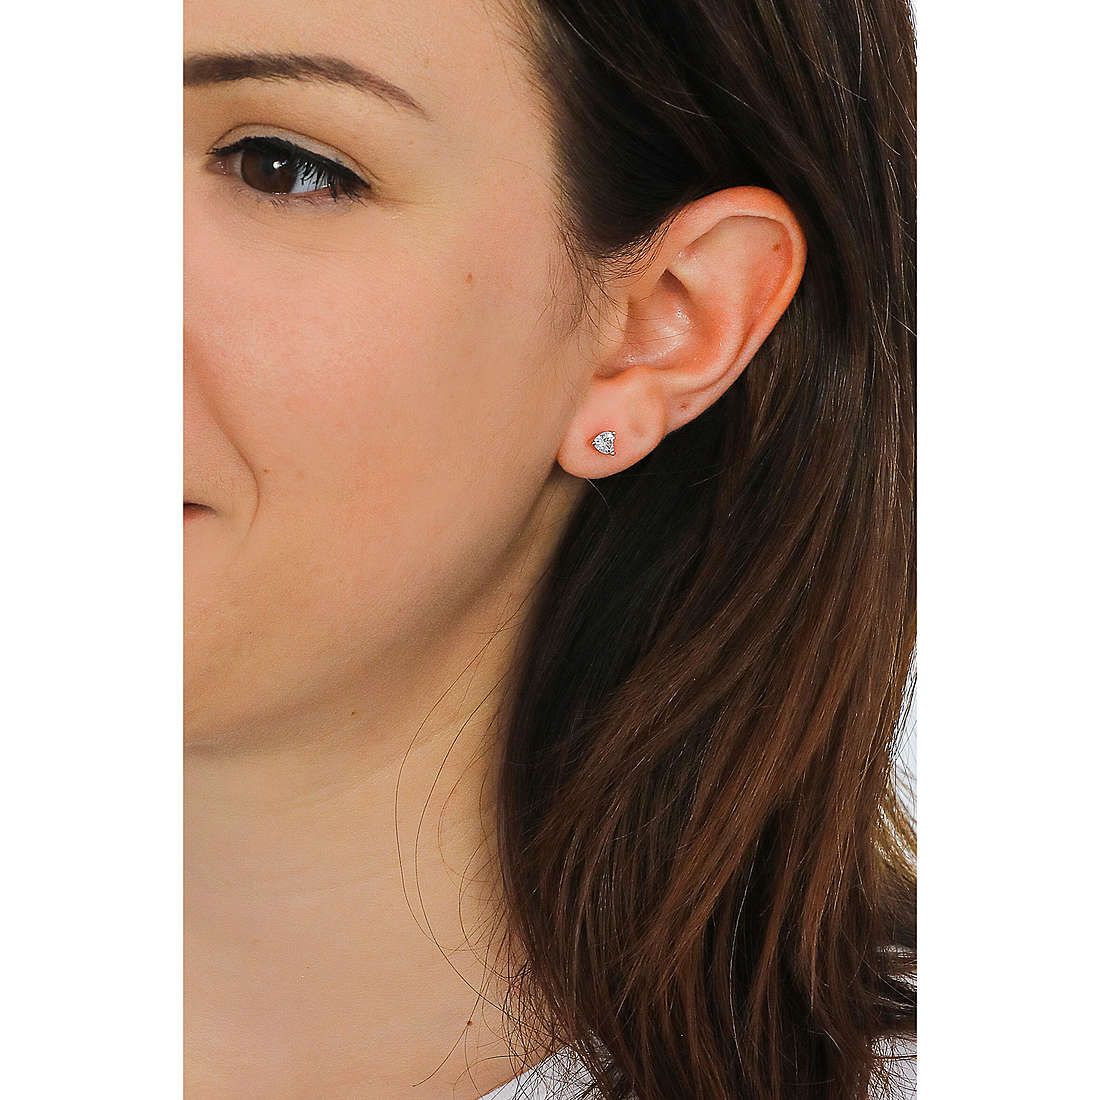 GioiaPura boucles d'oreille Amore Eterno femme INS028OR923SCRSWH Je porte